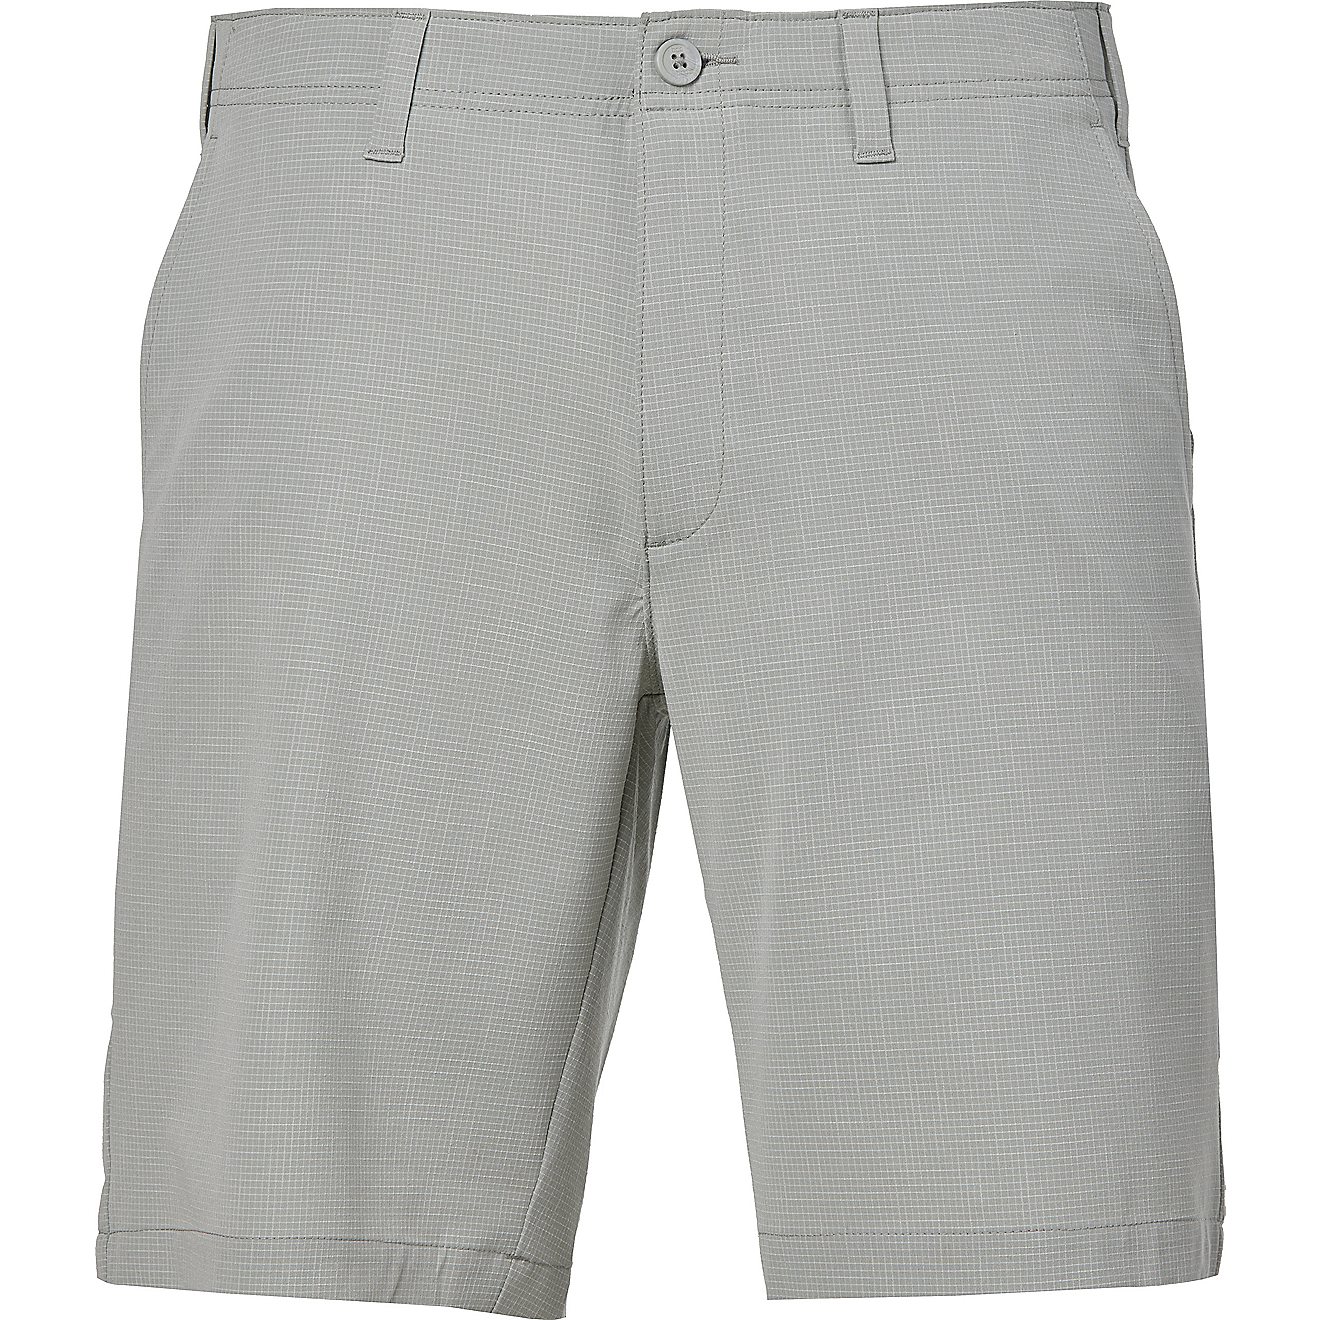 BCG Men's Golf Texture Shorts 10 in                                                                                              - view number 1